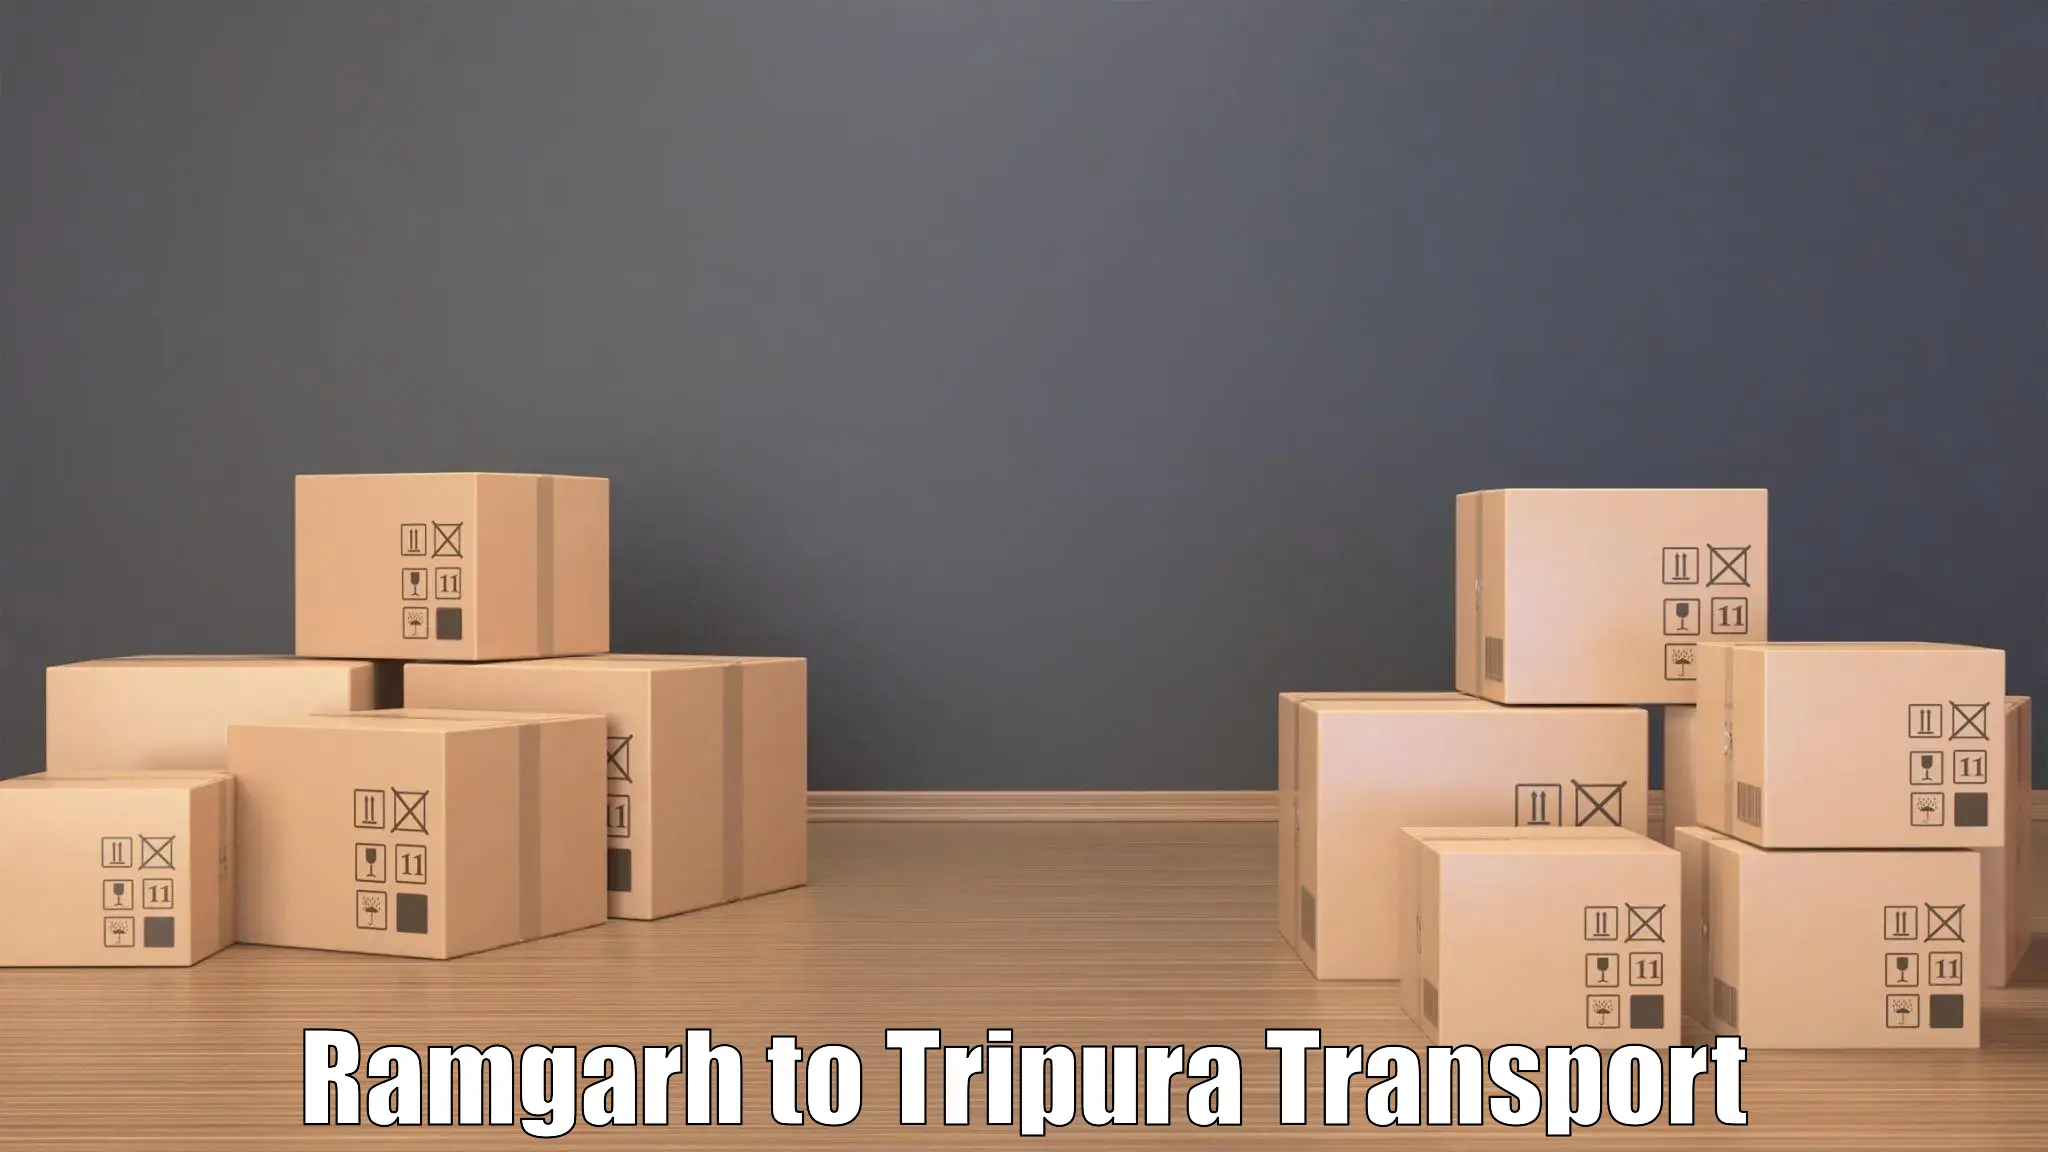 Two wheeler parcel service Ramgarh to Udaipur Tripura